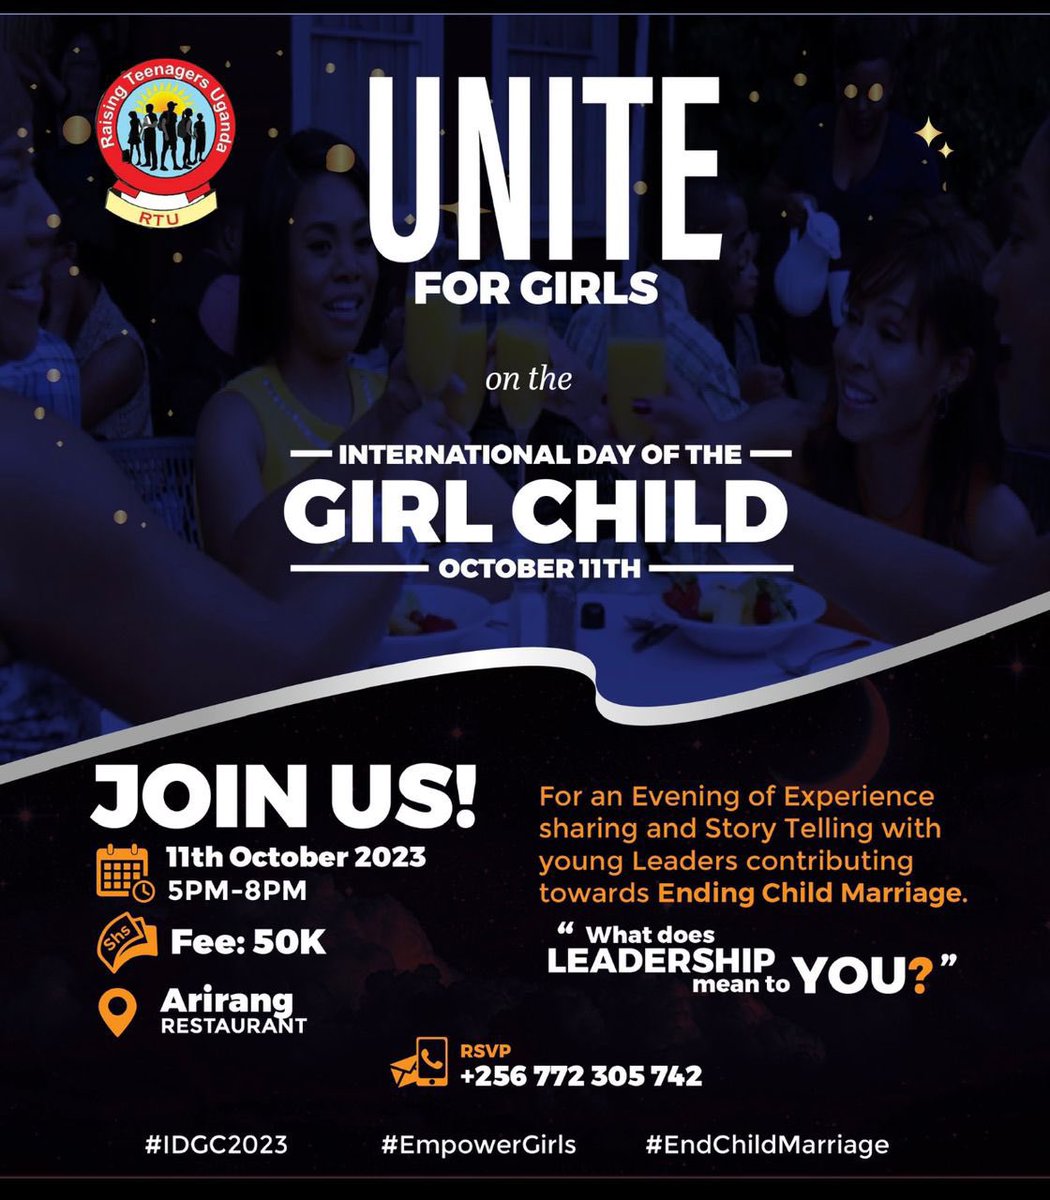 Mark your calendars for October 11th! 🗓 
Join us in celebrating #IDGC2023 with a powerful #UniteForGirlsNight hosted by @RaisingTeensUG1. Together, we'll stand against #ChildMarriage and empower girls for a brighter, more equal future. 
Let's make a difference! #EndChildMarriage